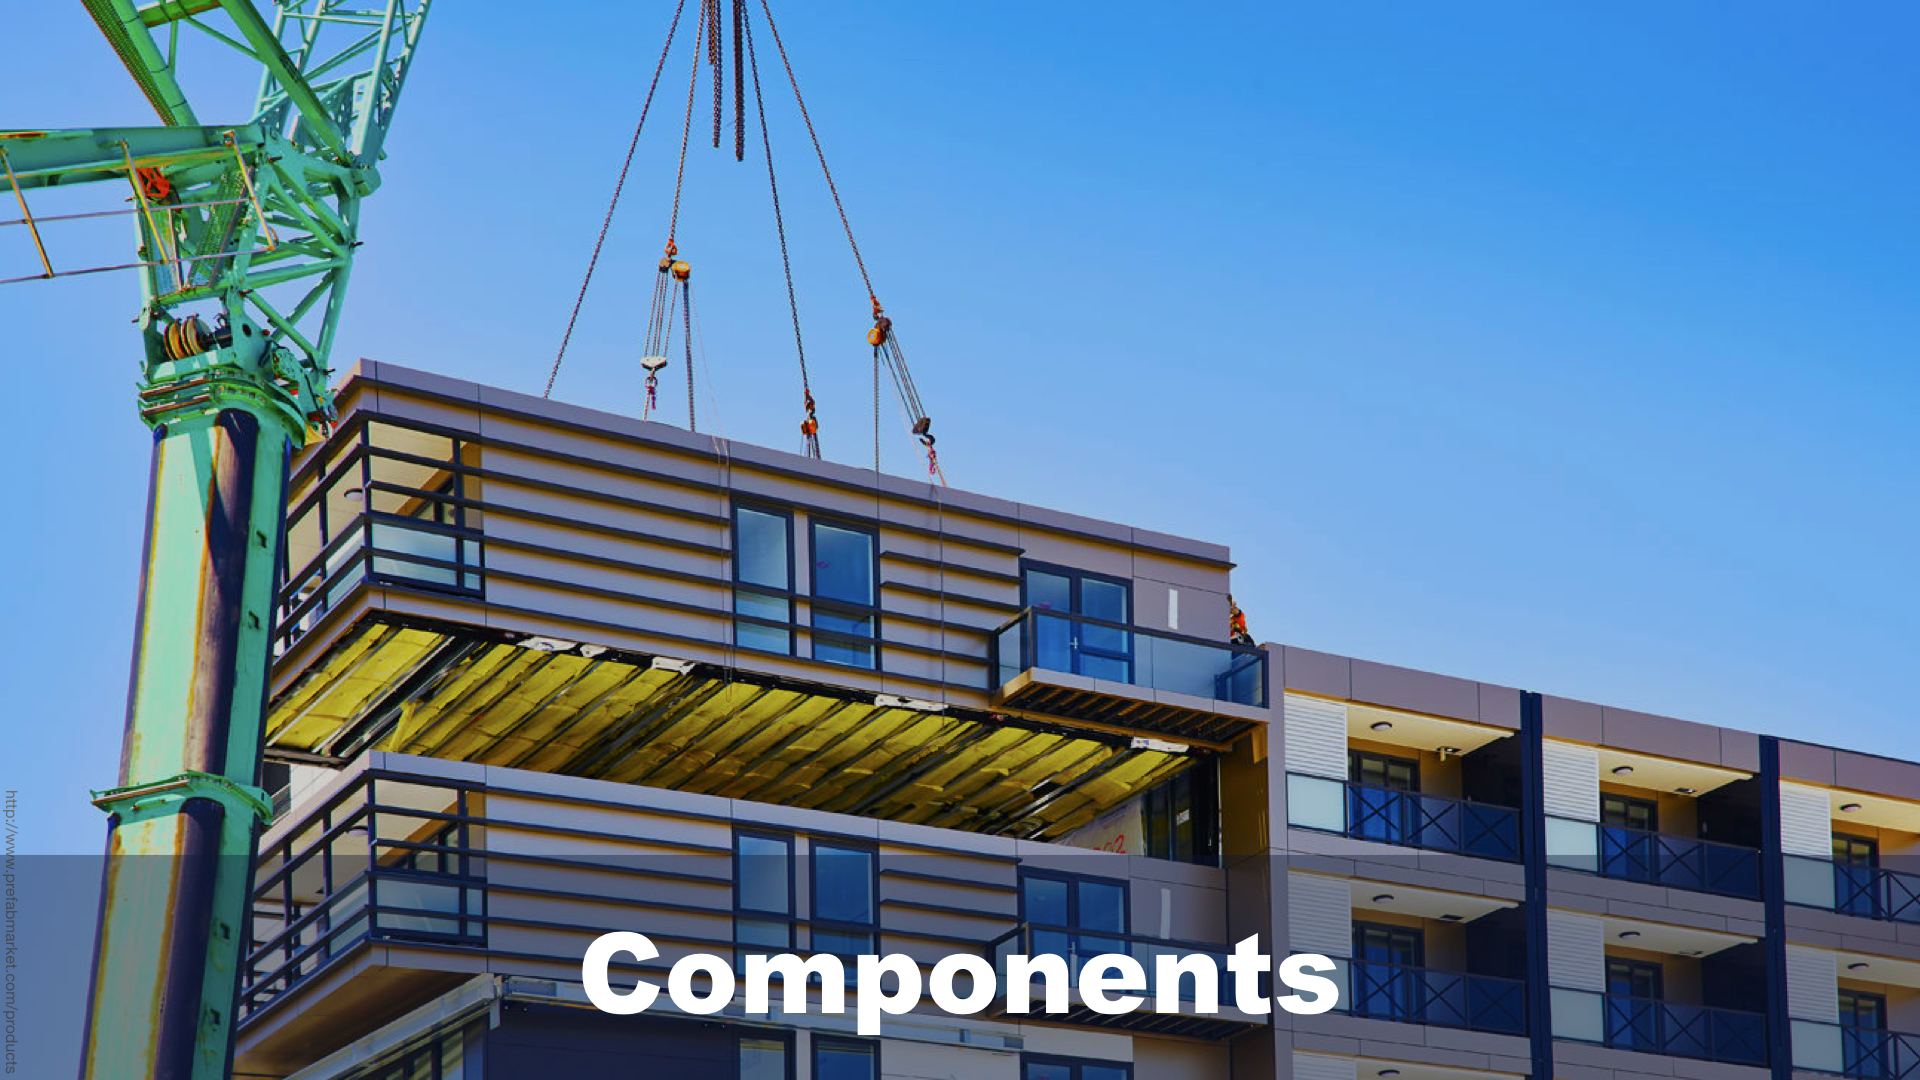 Components in React compared to Prefabricated Units in High-rise construction